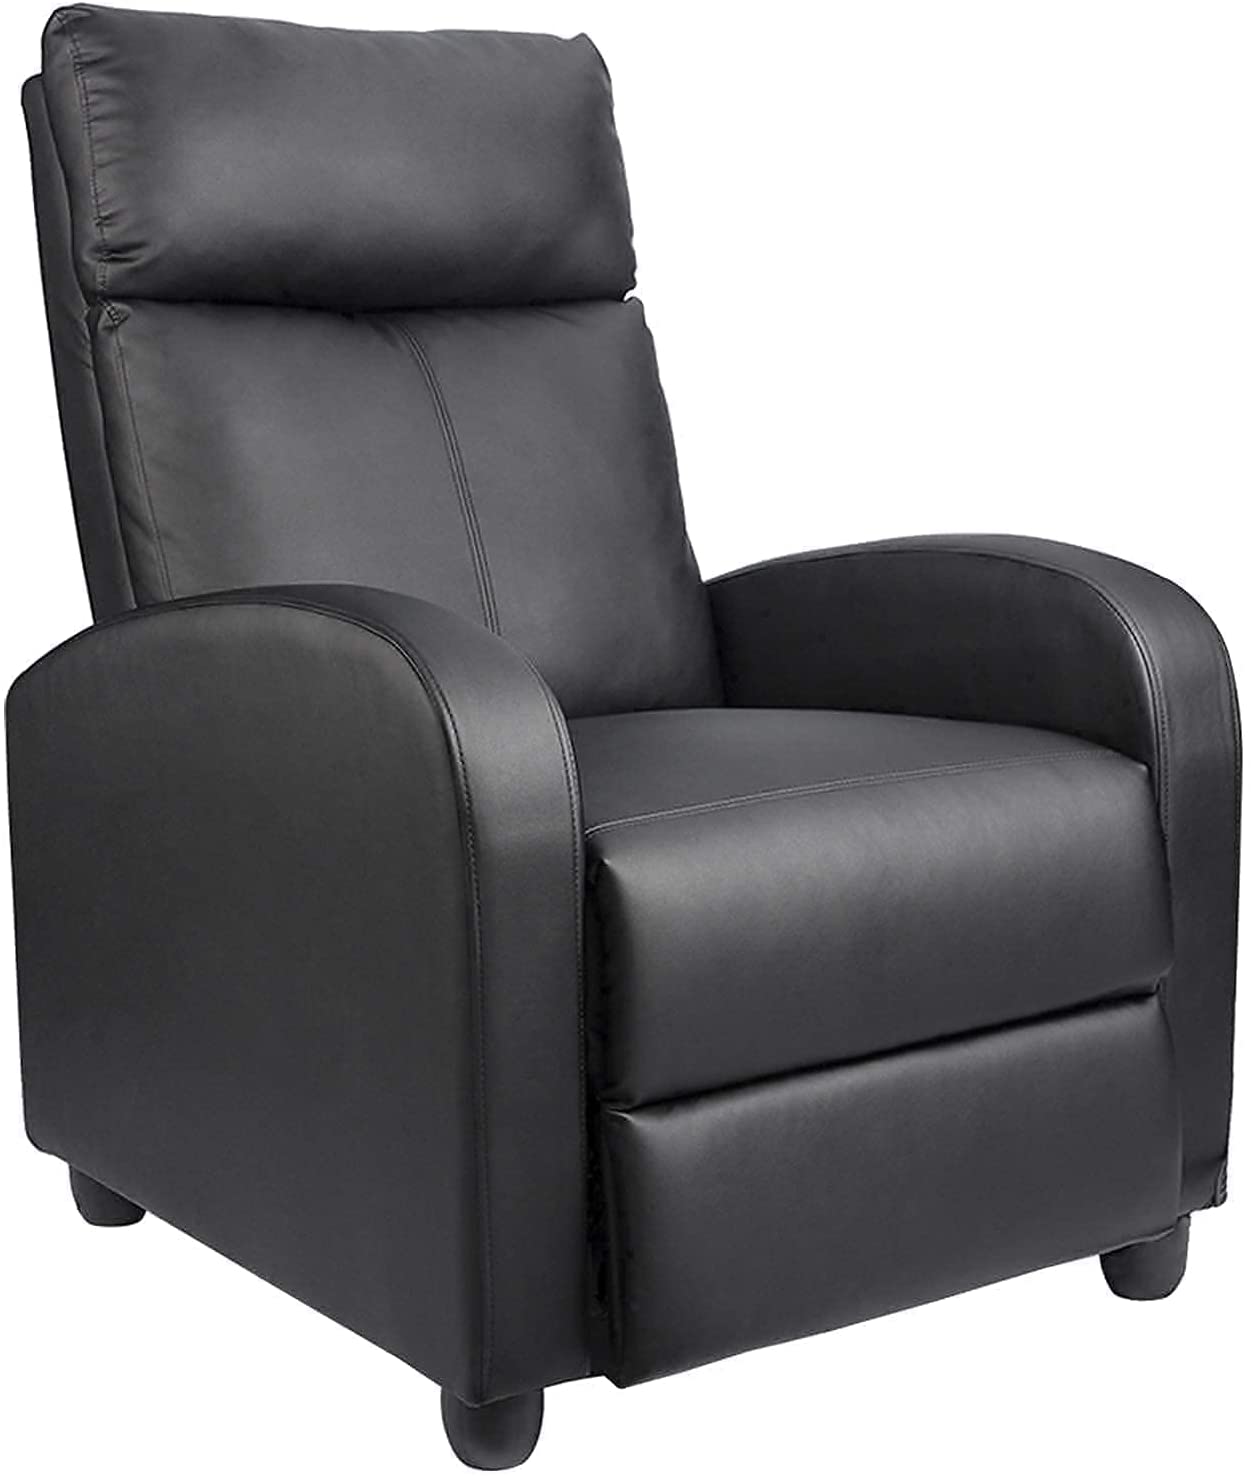 <strong>Homall Recliner Chair Padded Seat</strong>